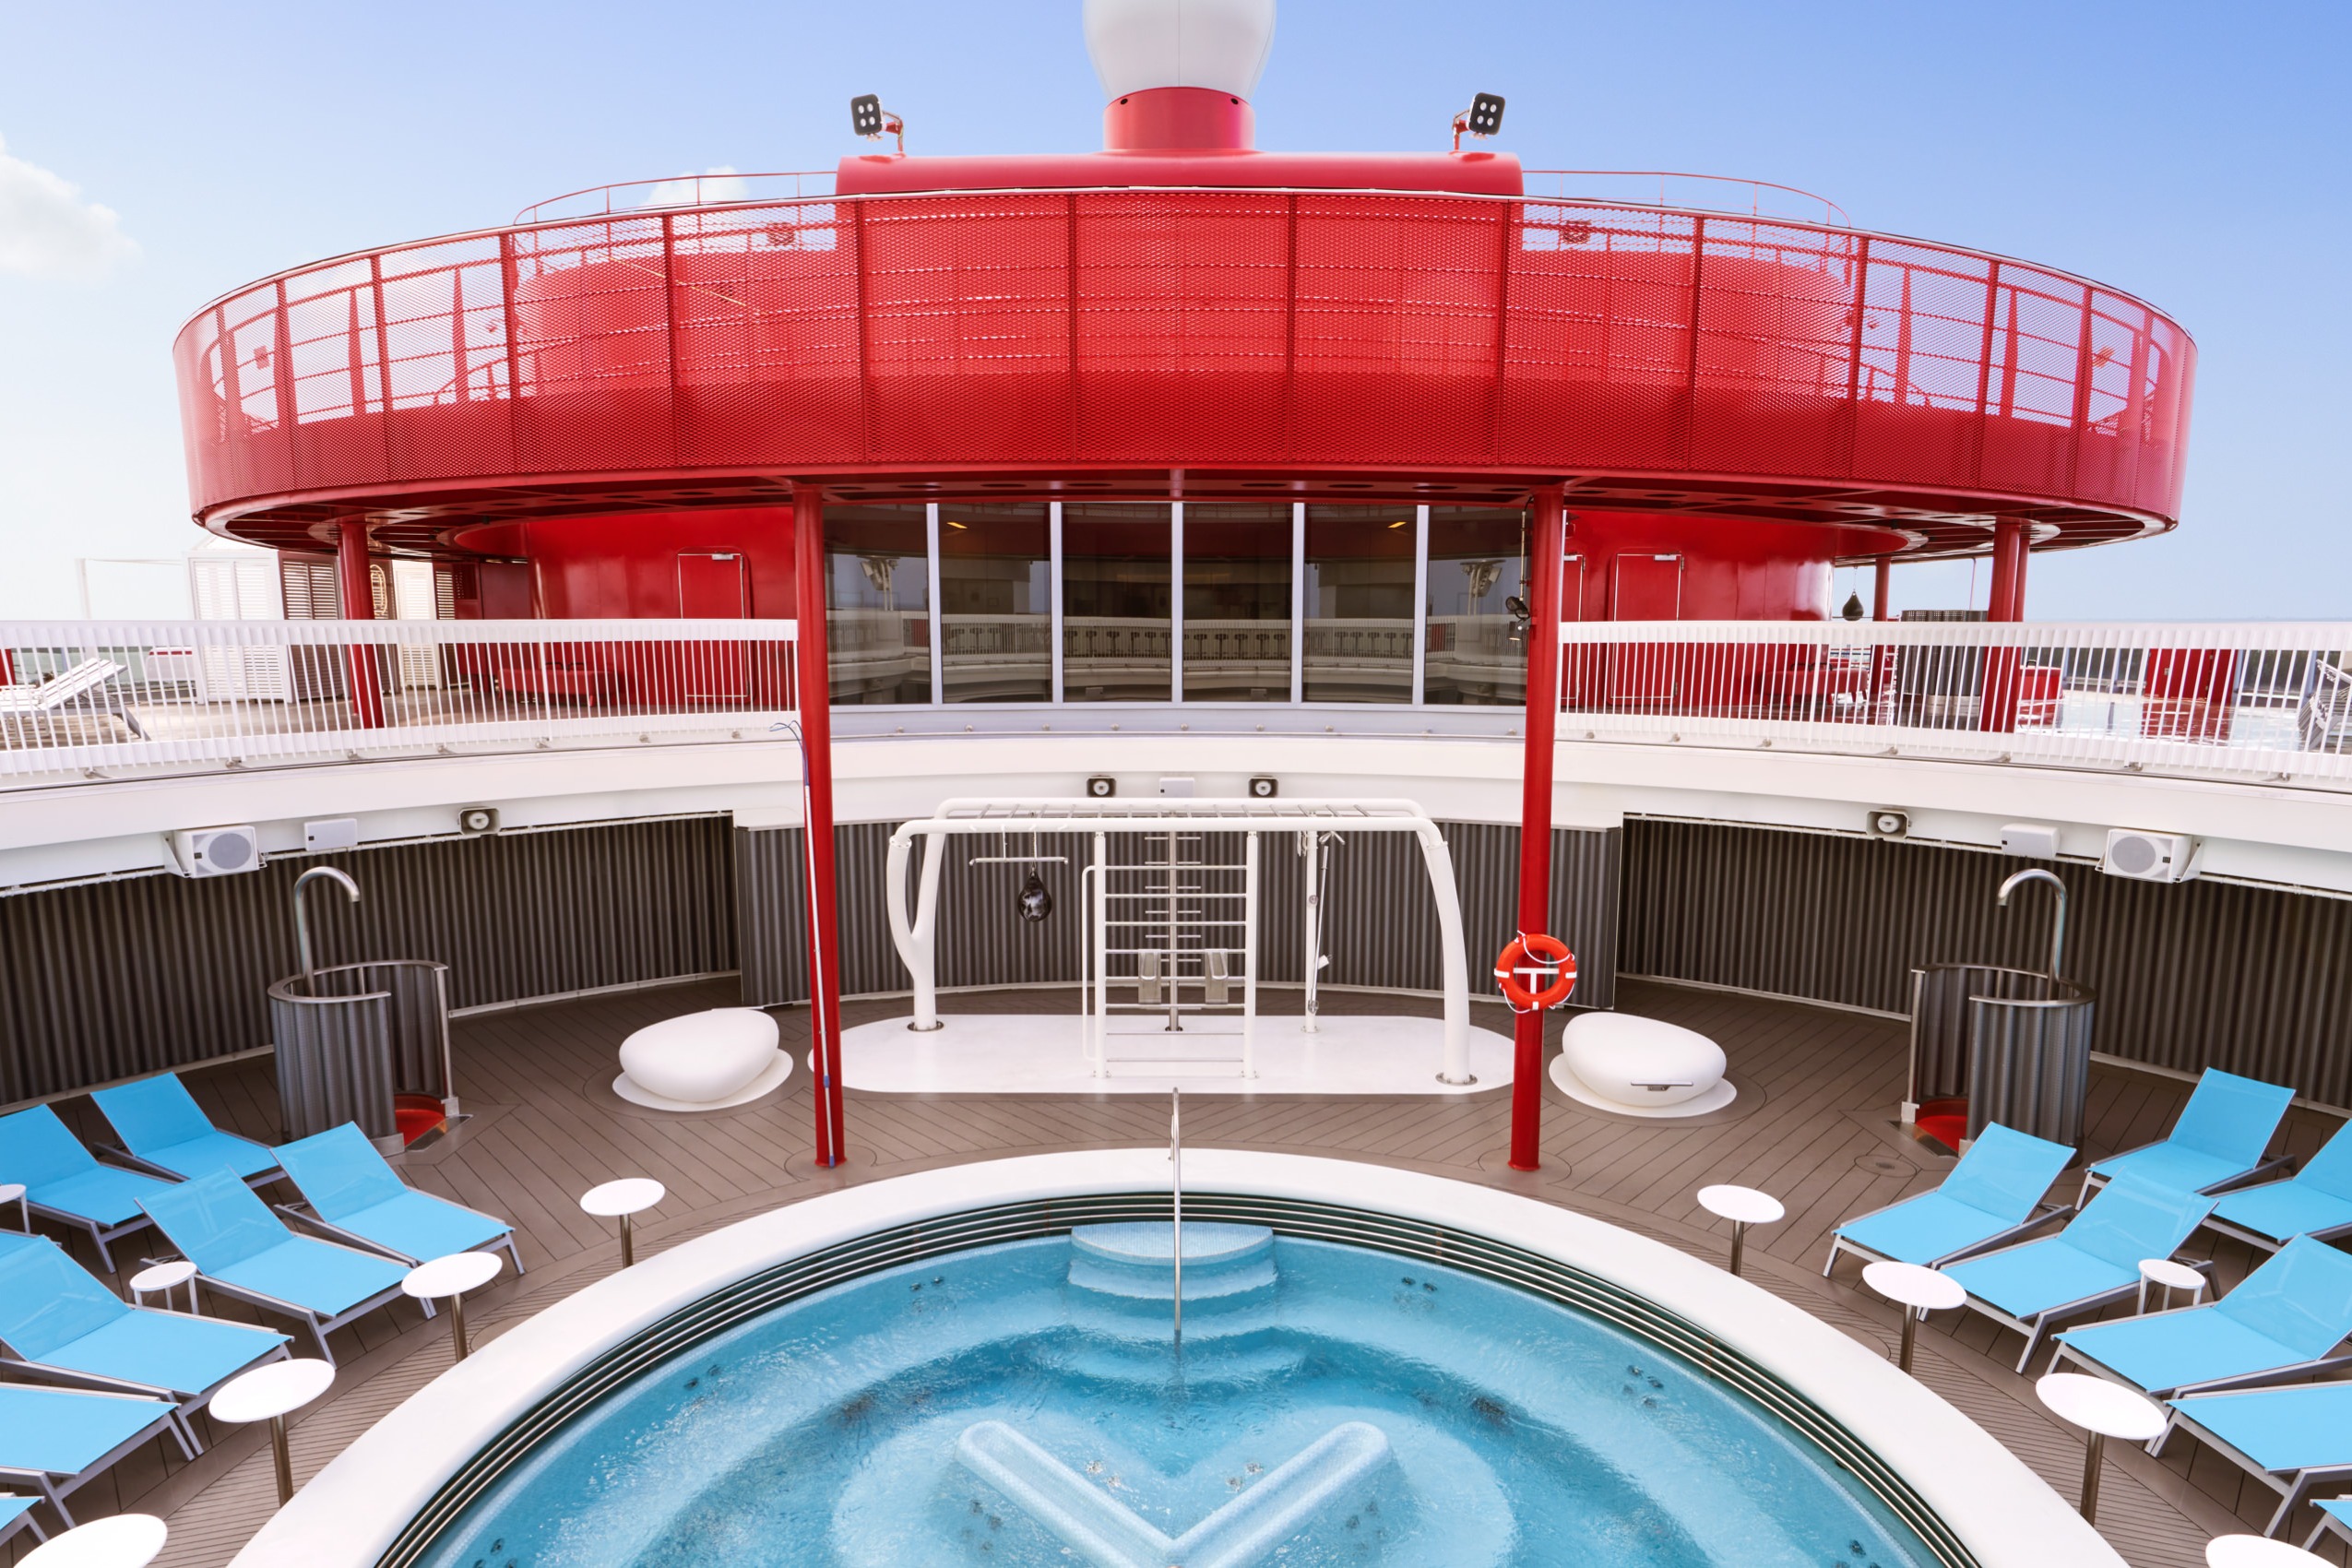 Virgin Voyages AdultsOnly Cruises Are Amazing. Here’s Why